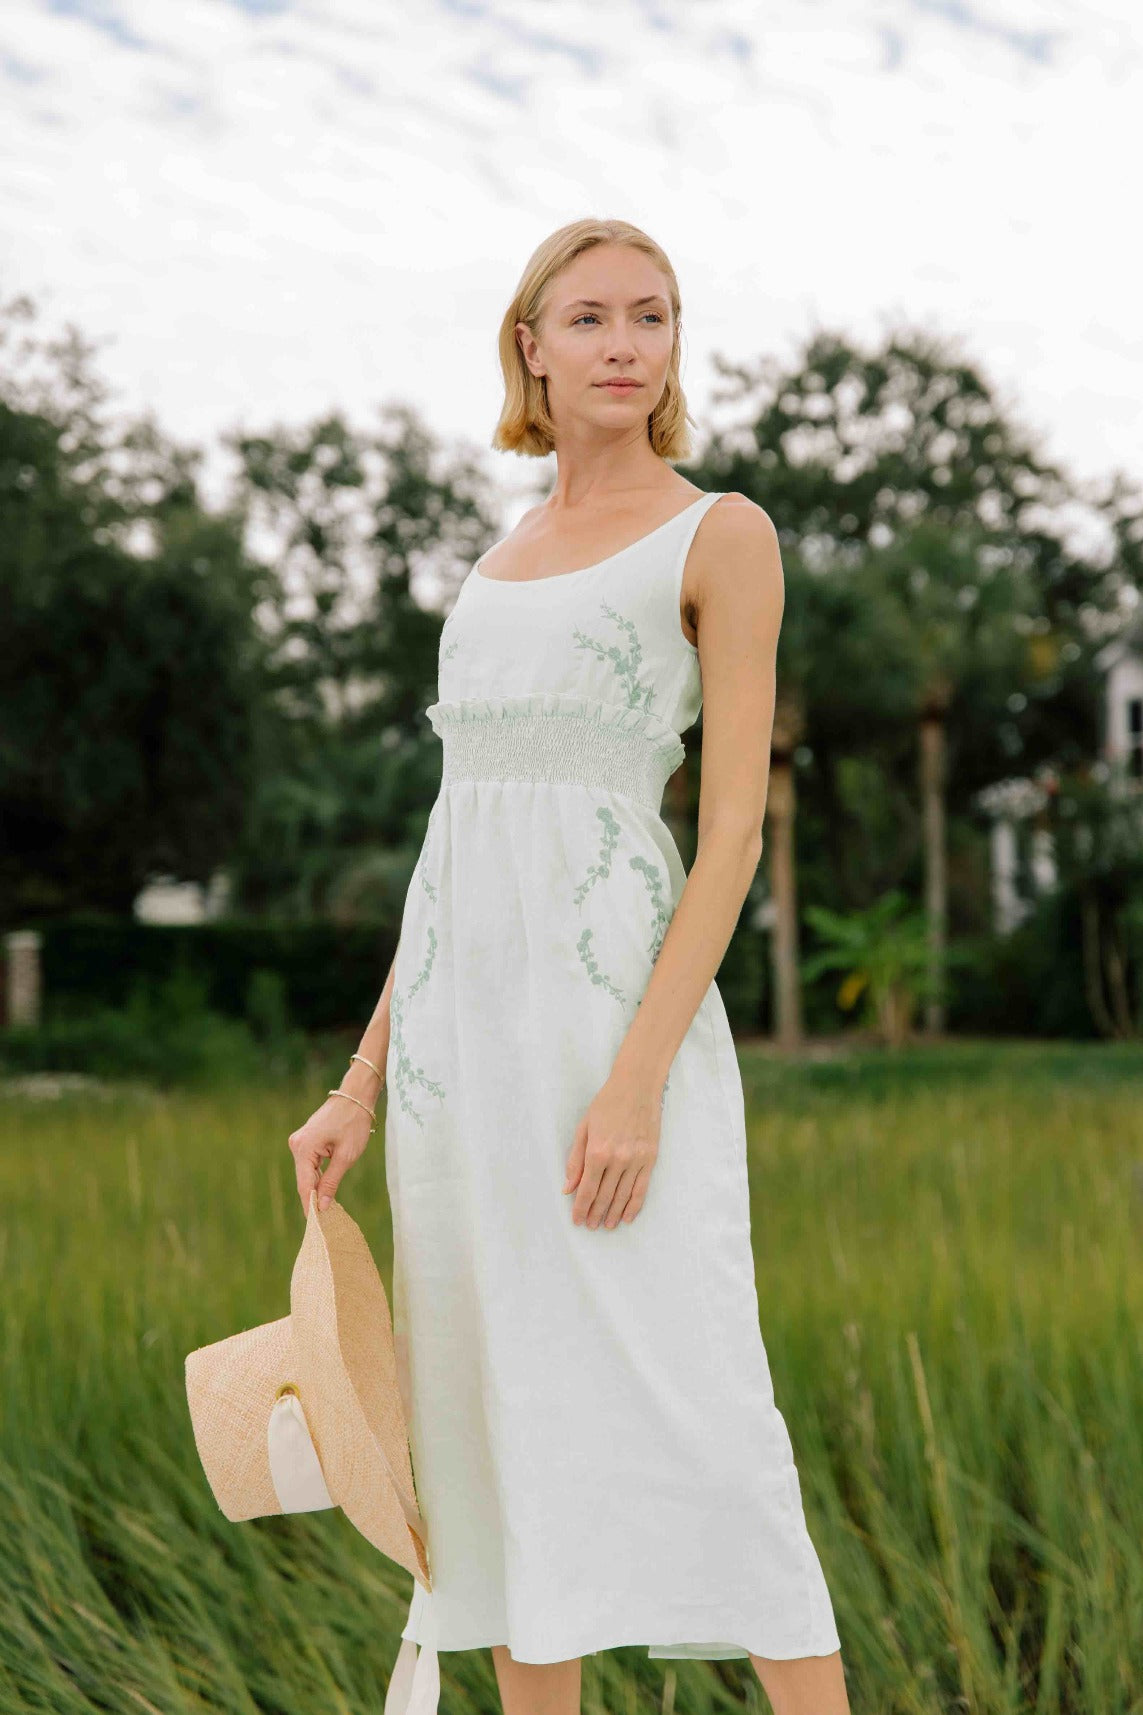 BAHAR Sleeveless Midi Linen Sheath Dress. Featuring a smocked waistband with ruffle trim and a hand-embroidered floral pattern.